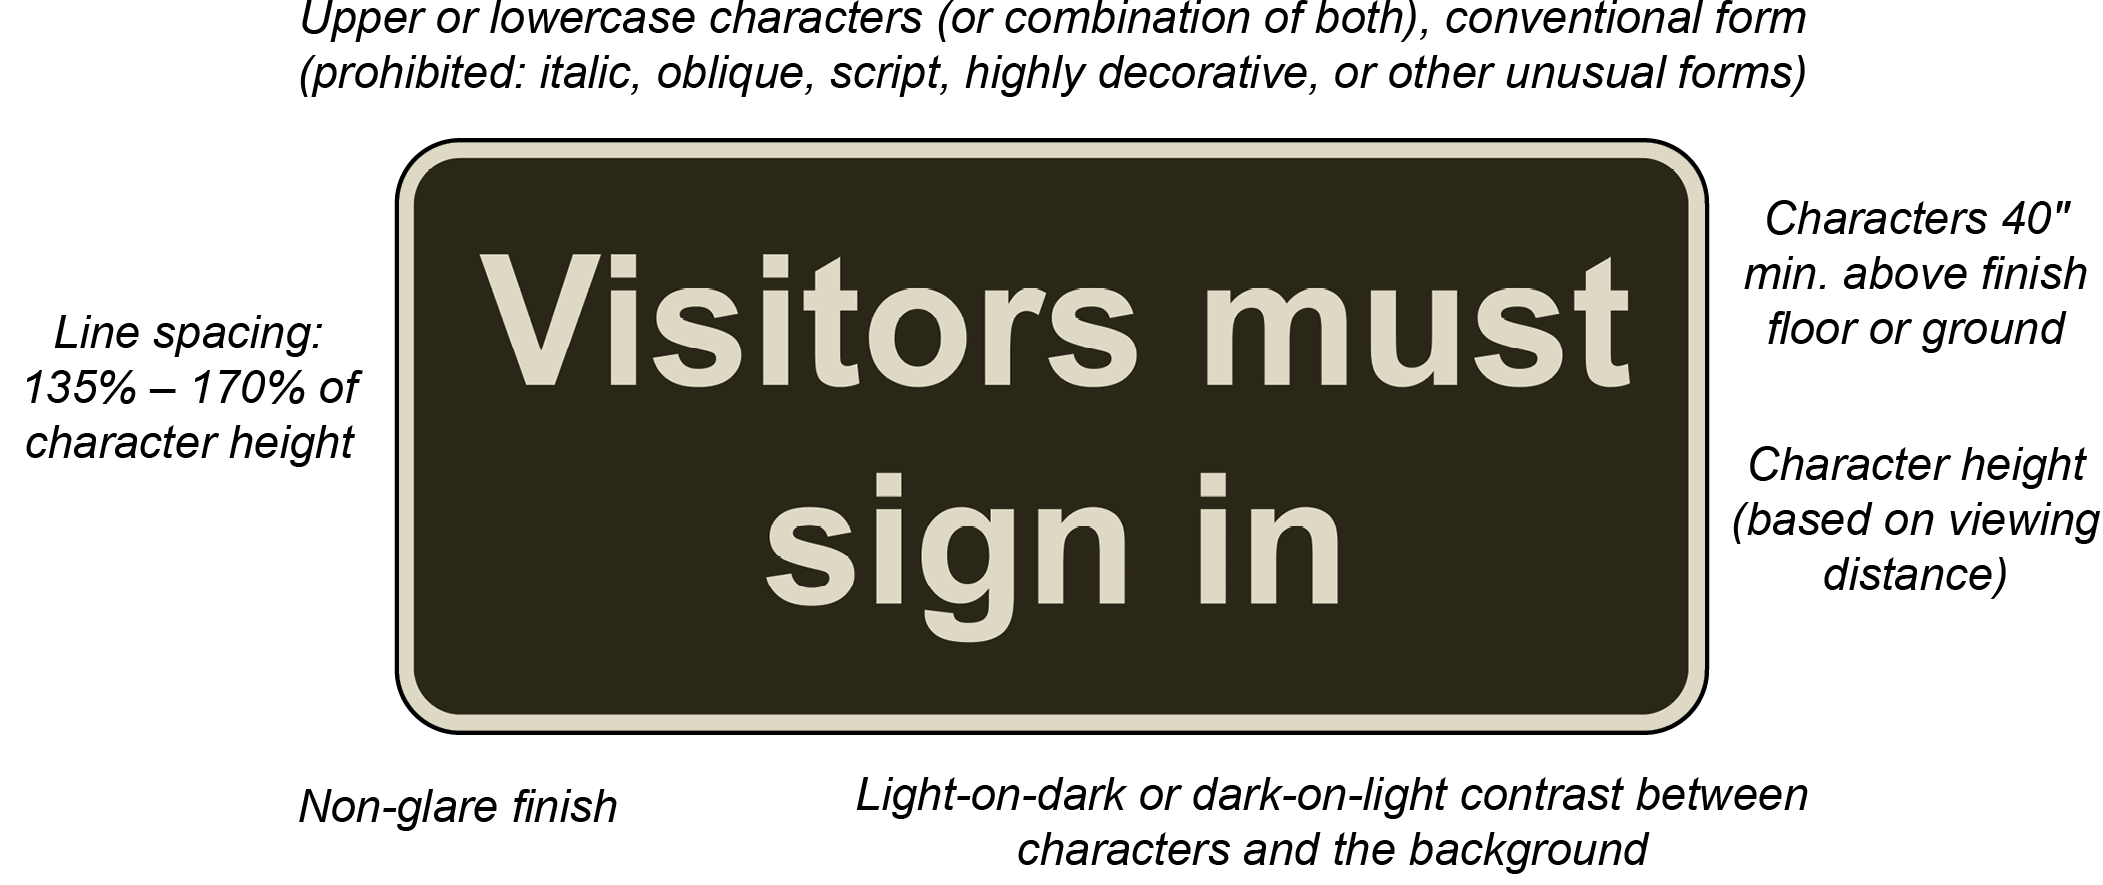 Sign, visitors must sign in, with only visual characters.